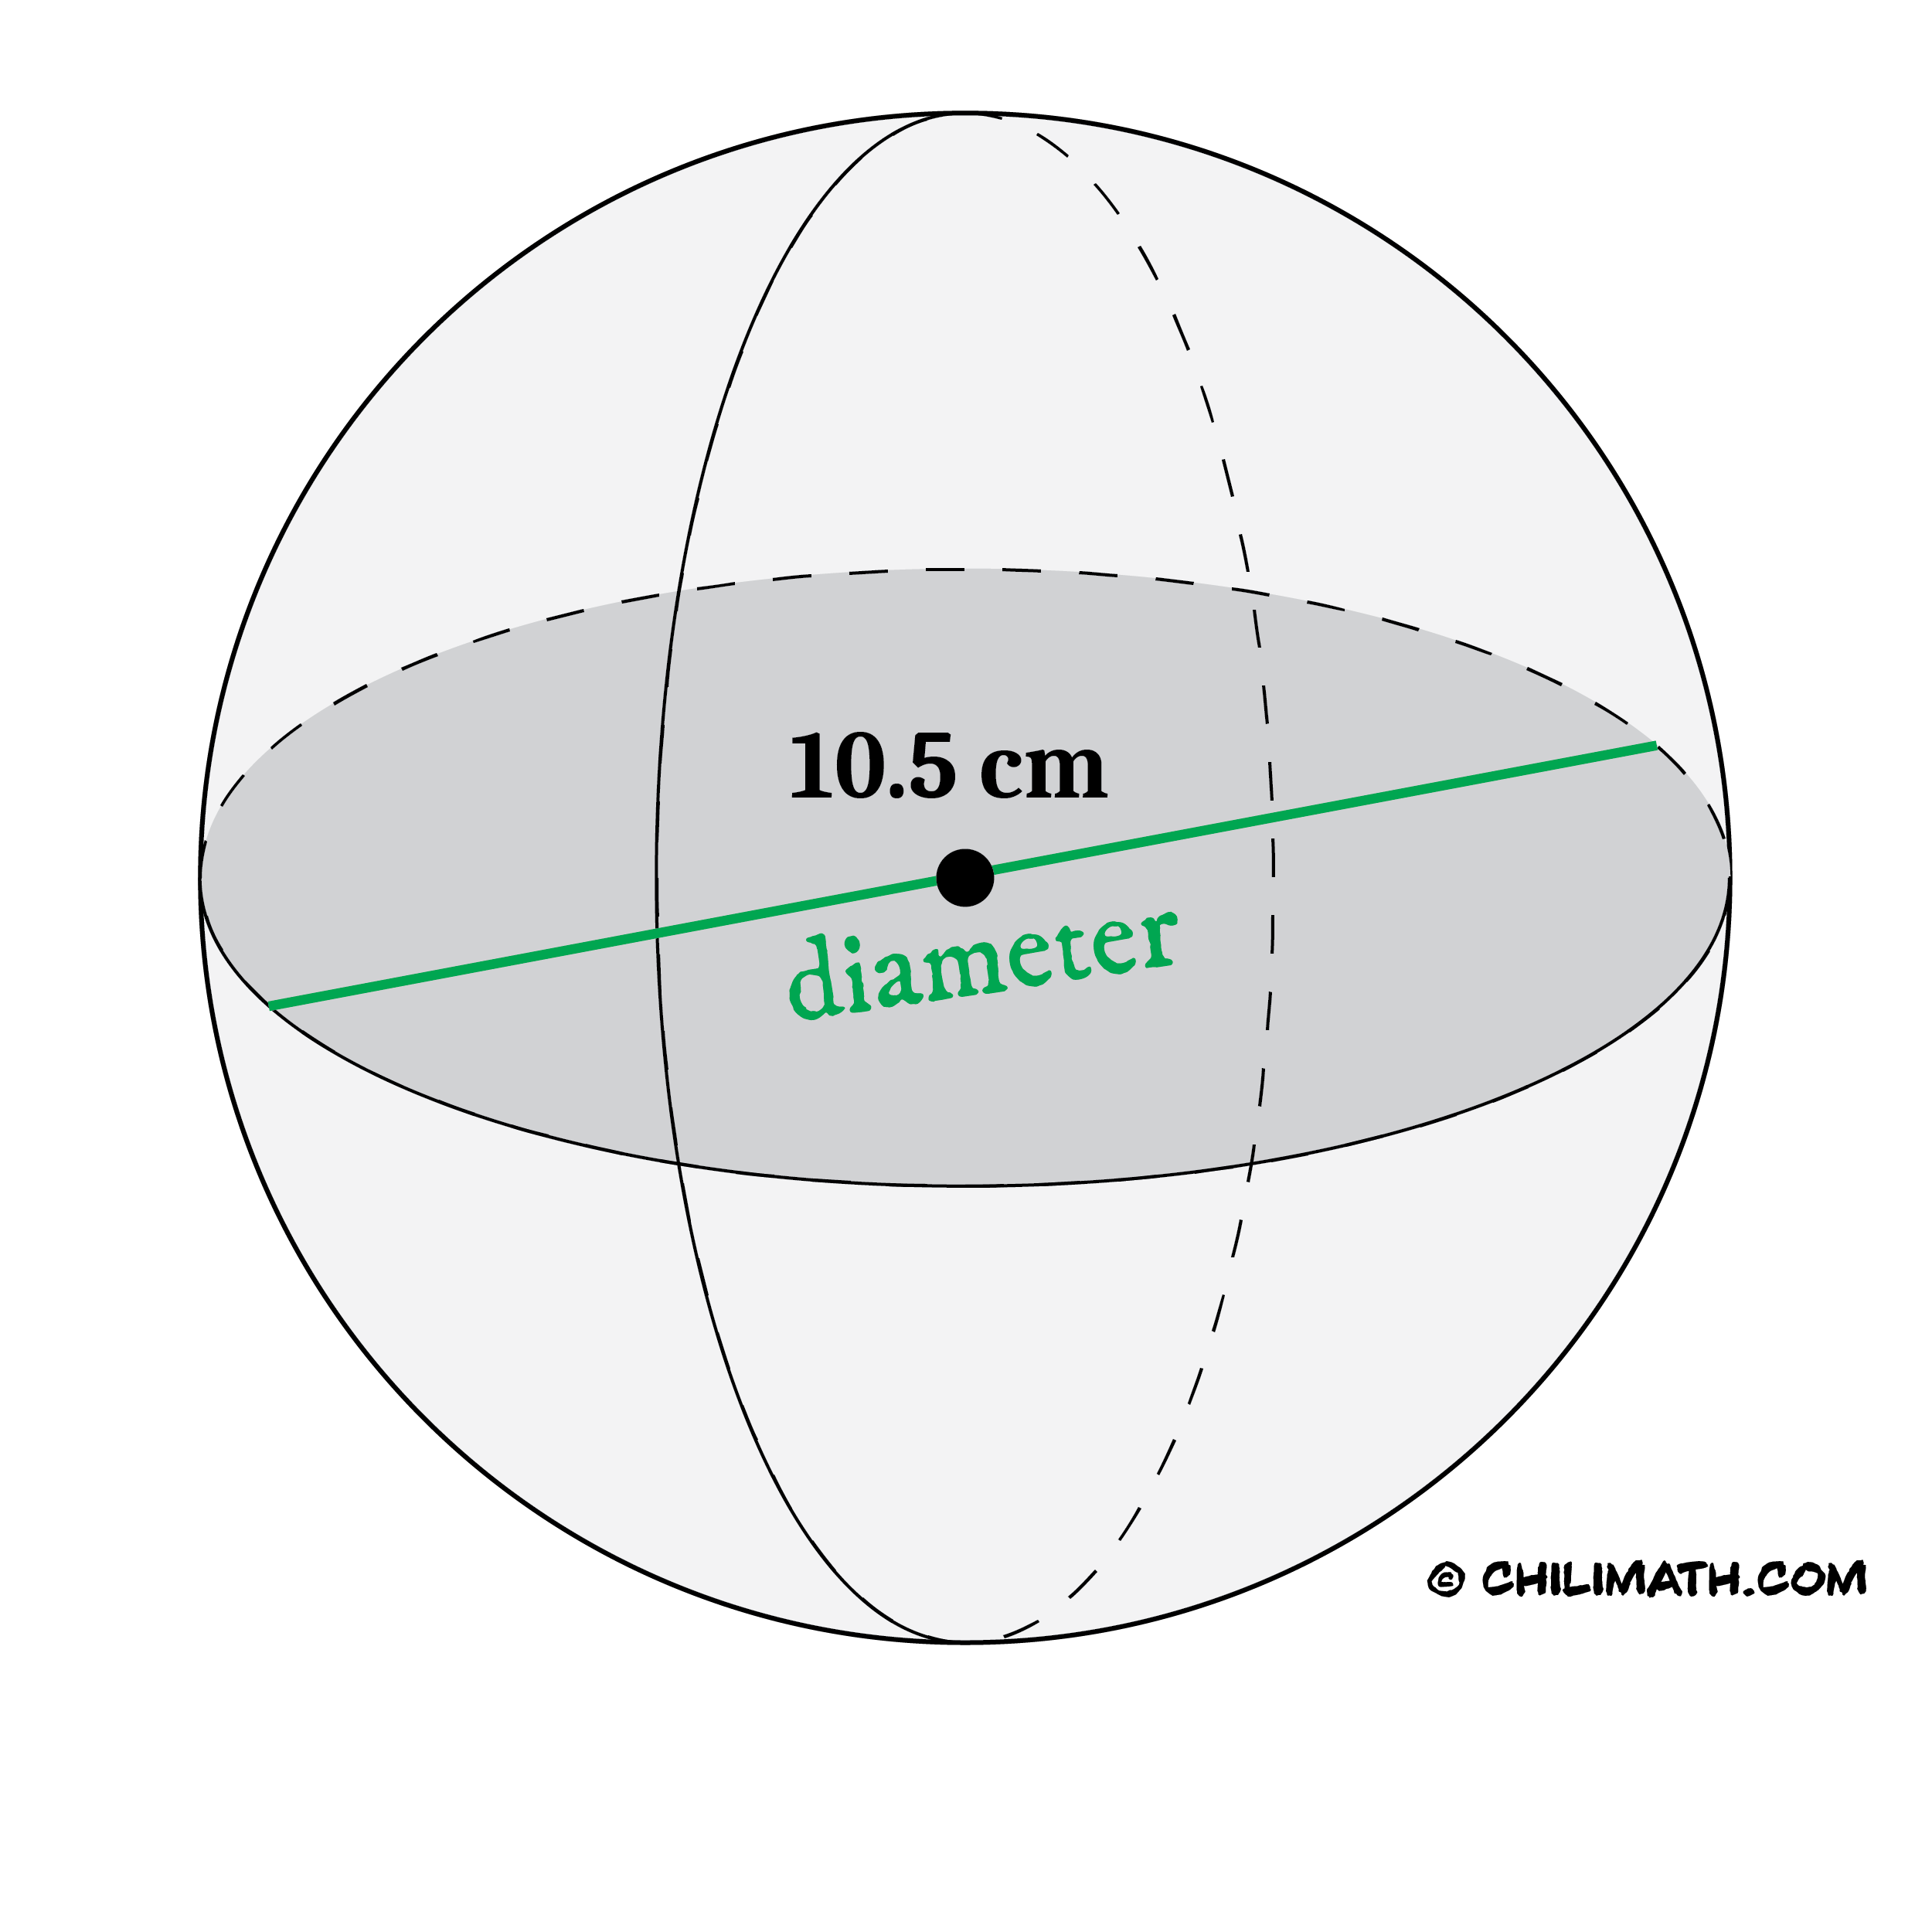 a gray sphere with a diameter of 10.5 centimeters